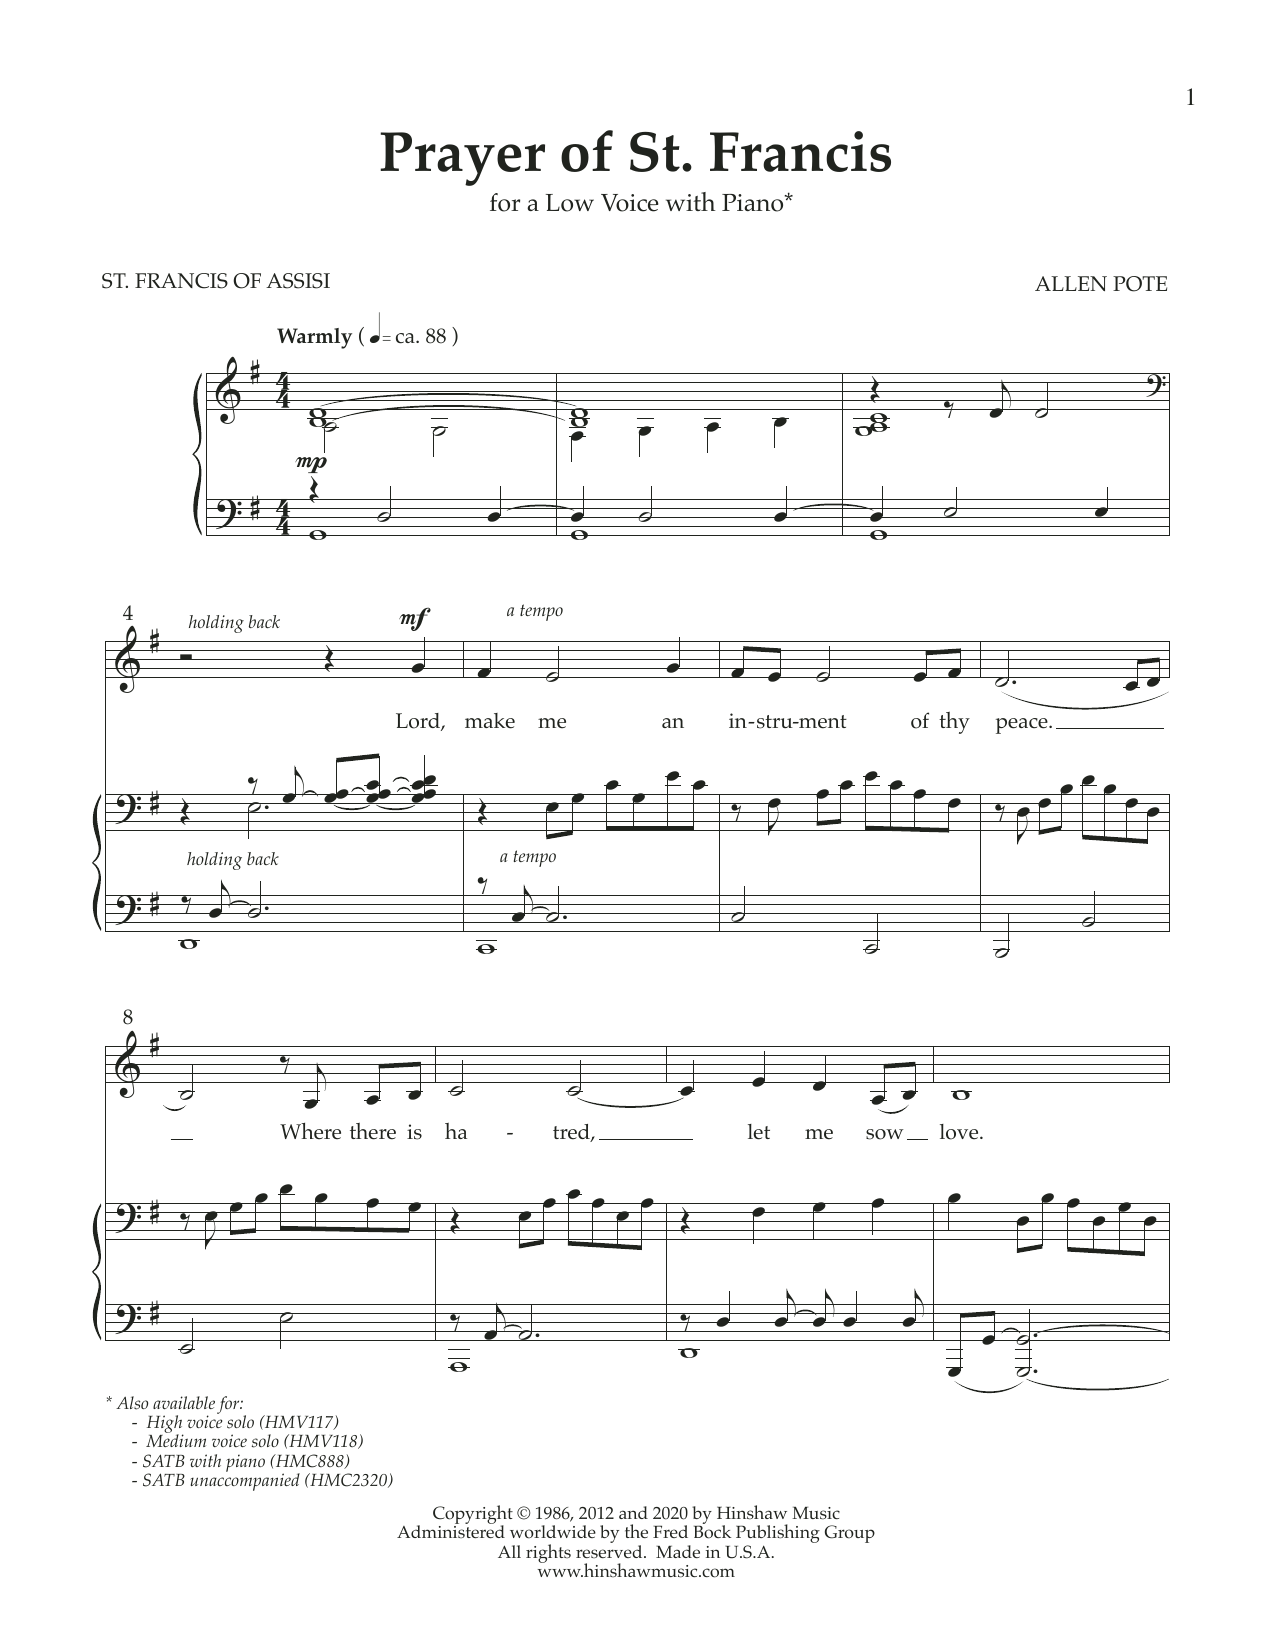 Download Allen Pote Prayer of St. Francis (Low Voice) Sheet Music